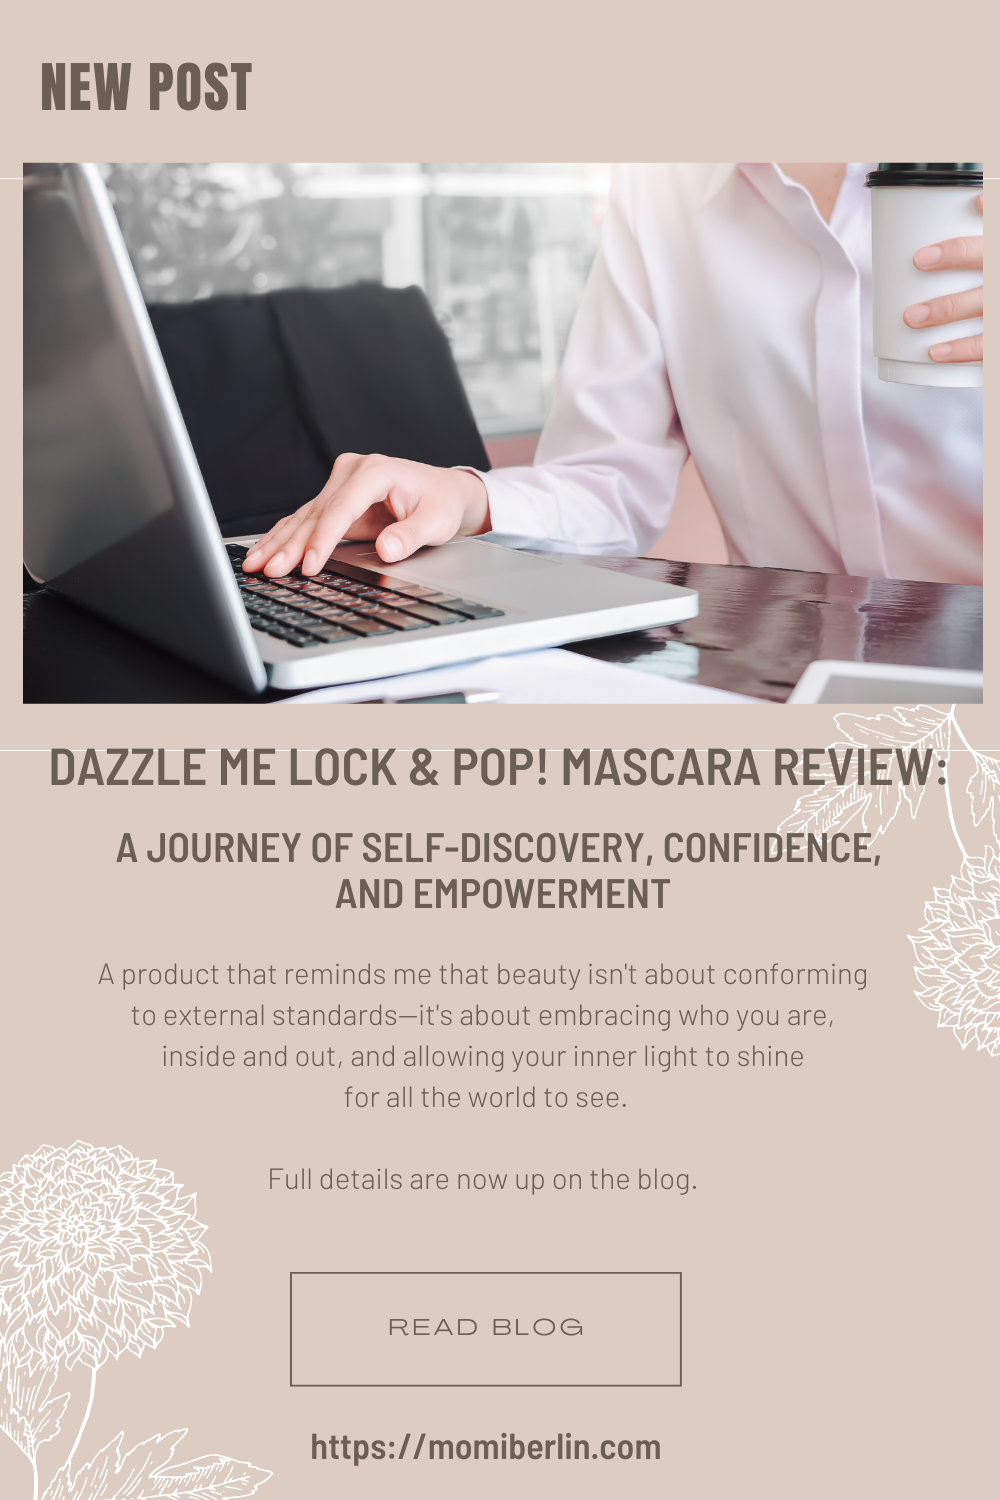 Dazzle Me Lock & Pop! Mascara review: A Journey of Self-Discovery, Confidence, and Empowerment